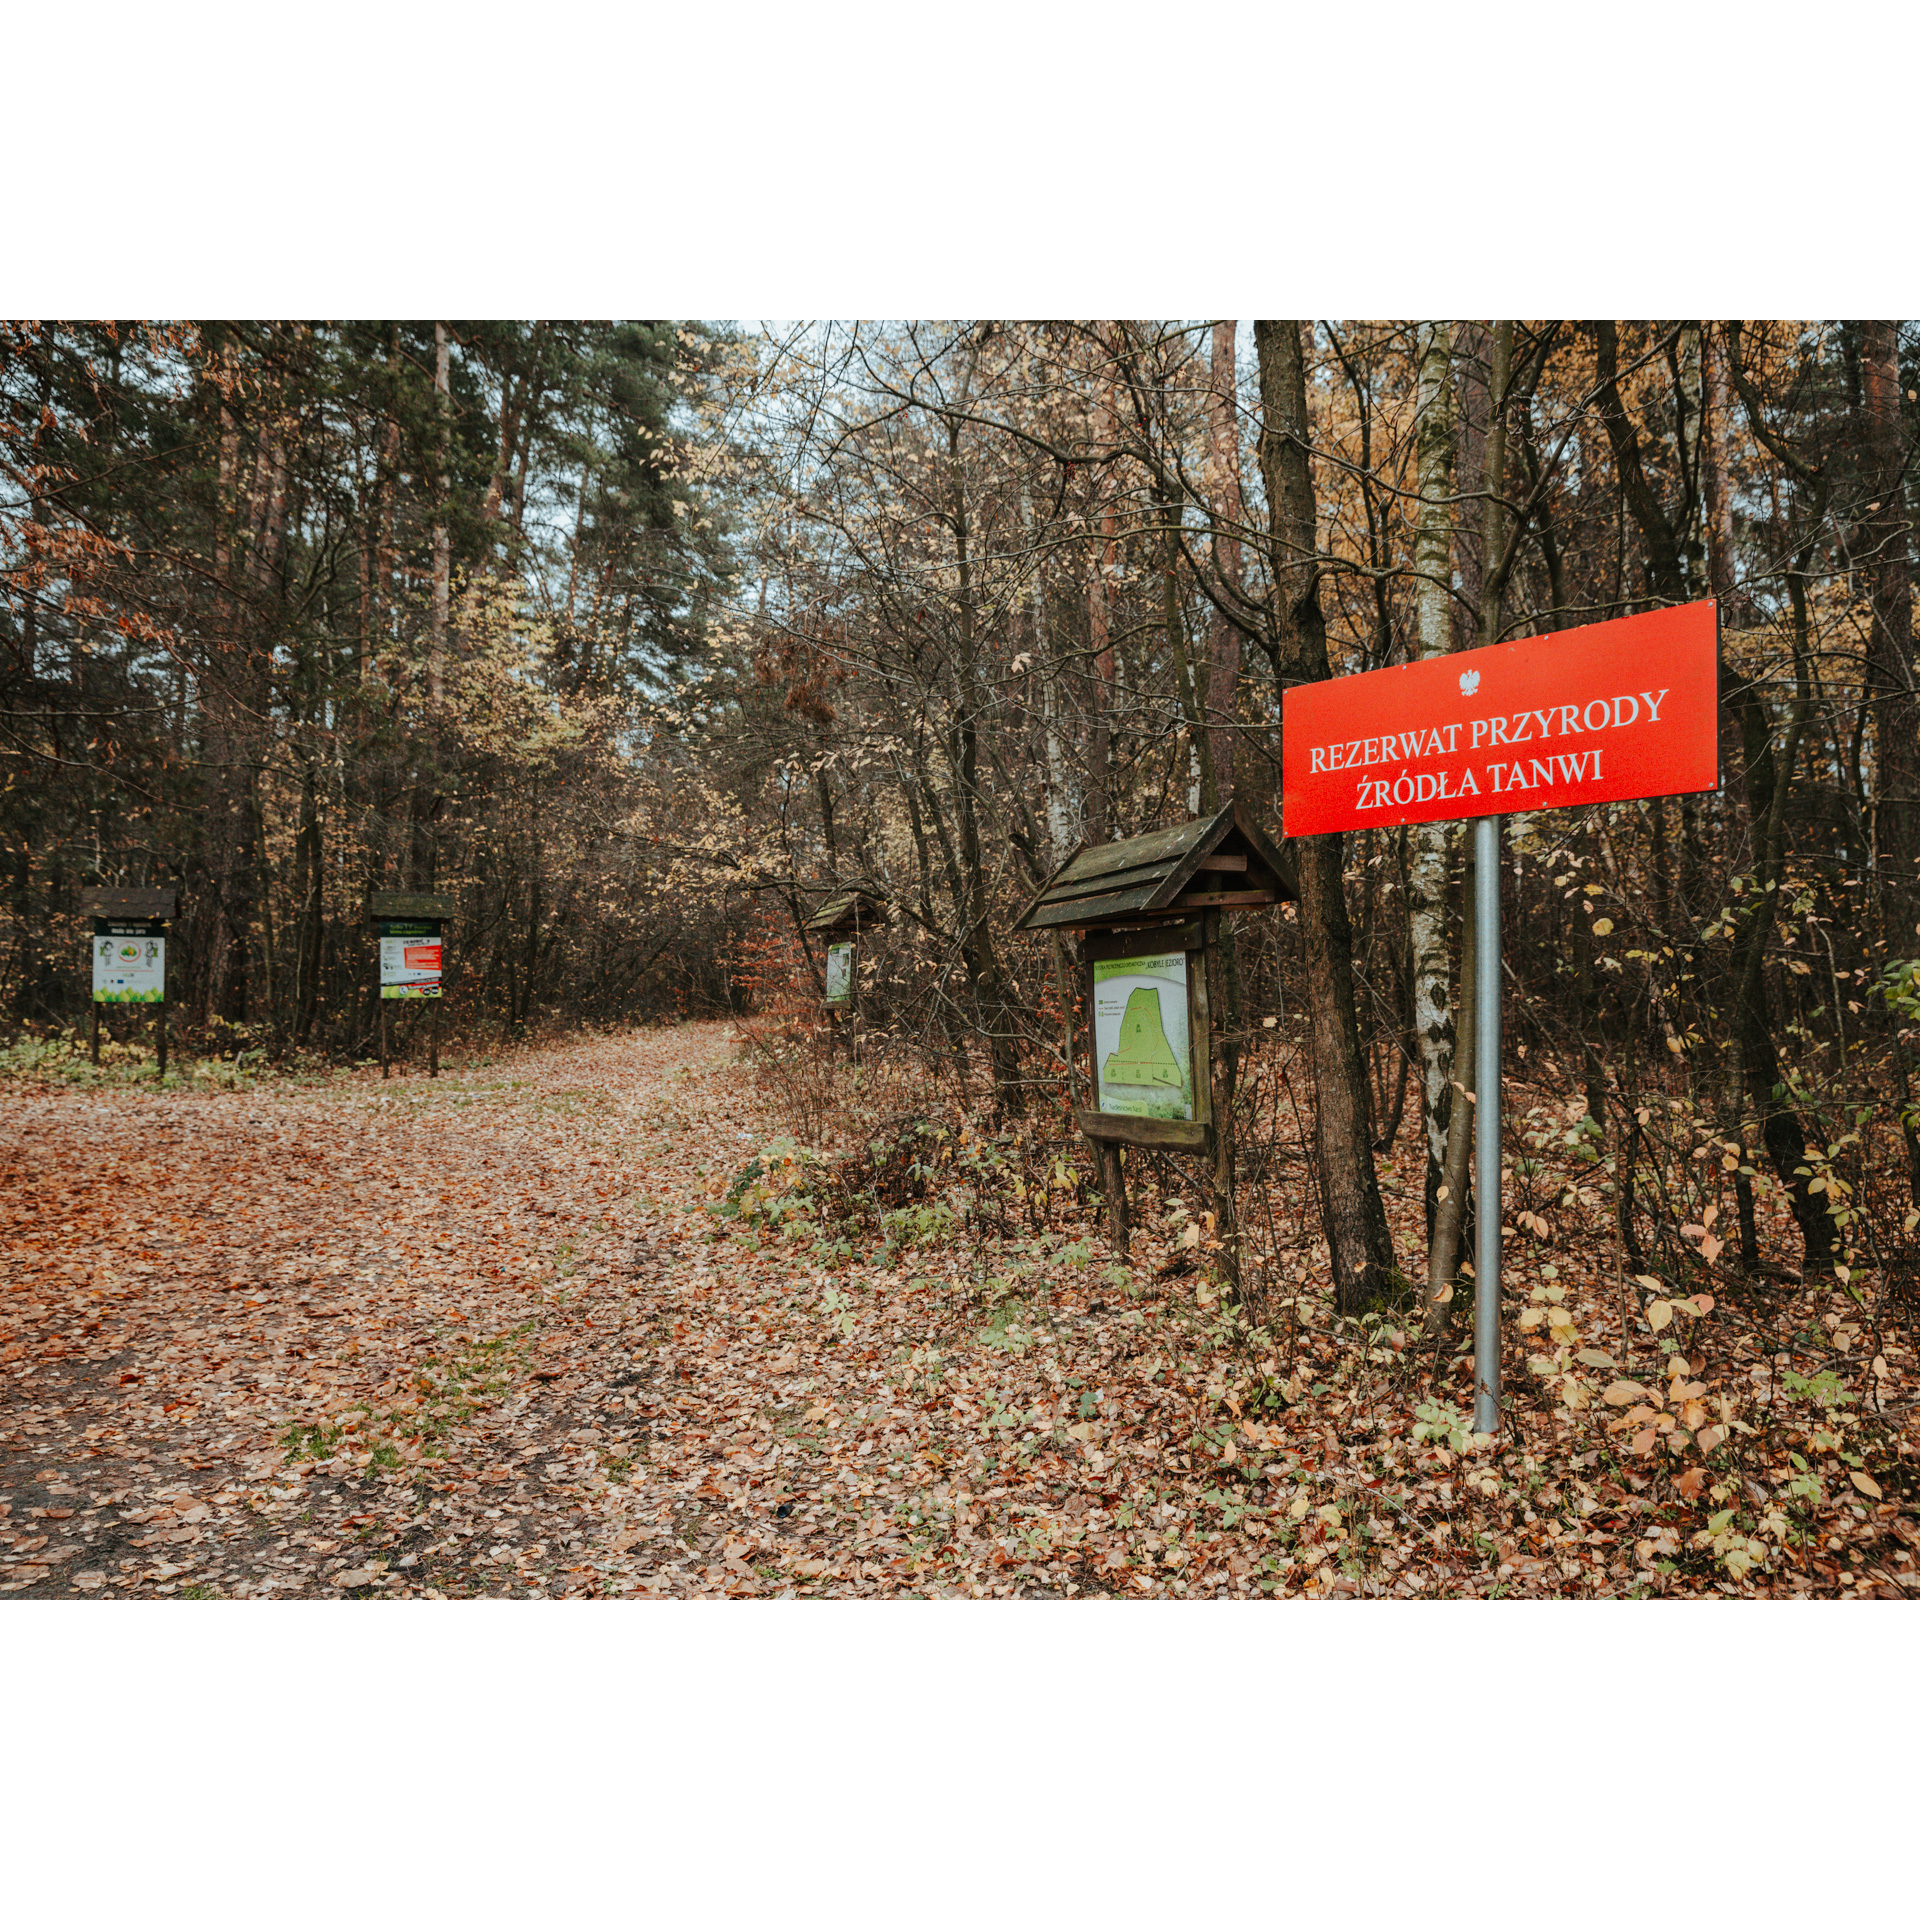 A forest path covered with leaves with a red information sign on the right